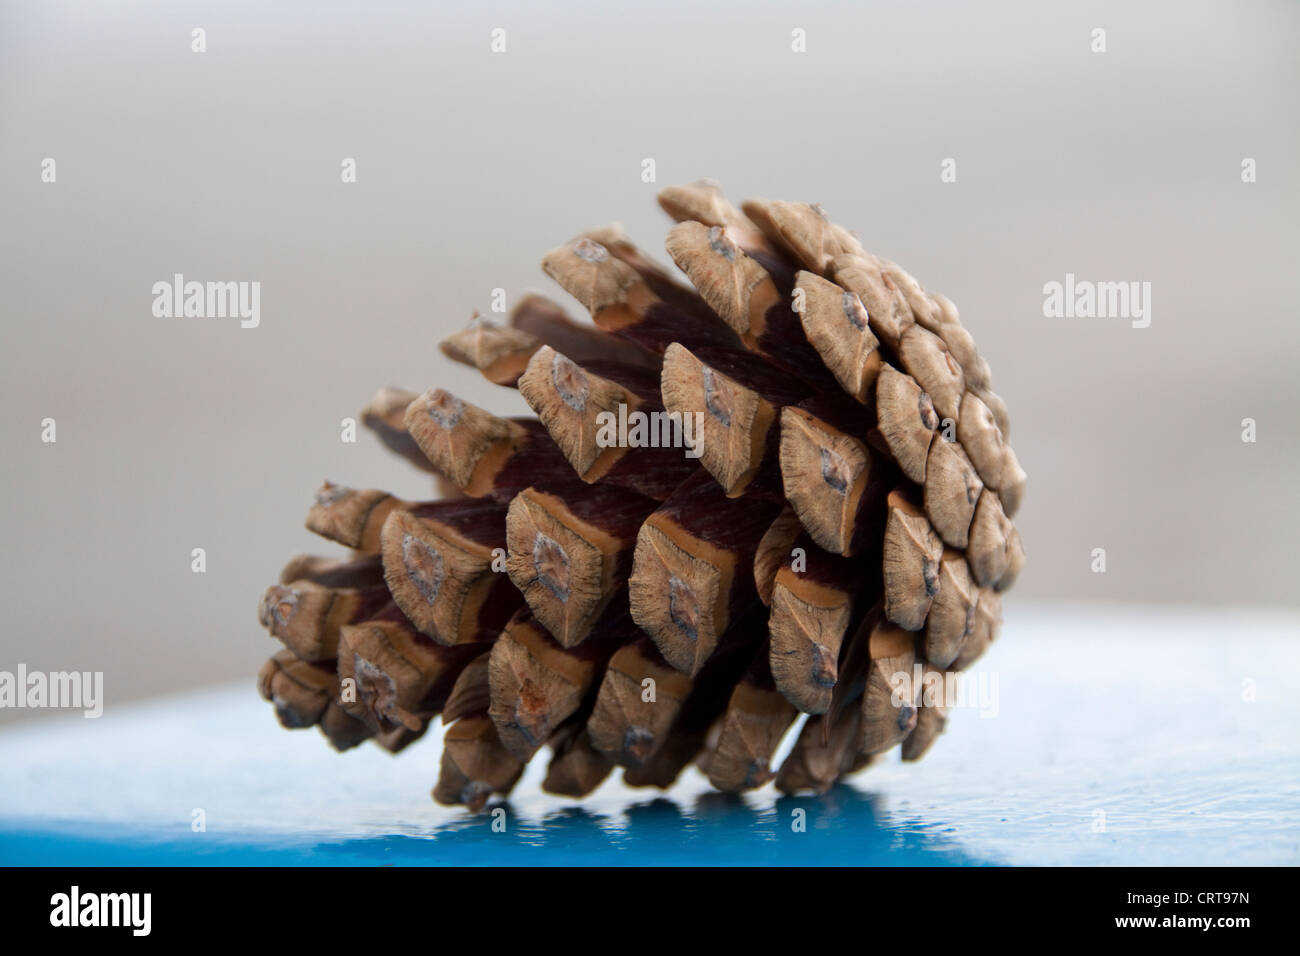 Cone Scales Close Up Stock Photos & Cone Scales Close Up Stock ...